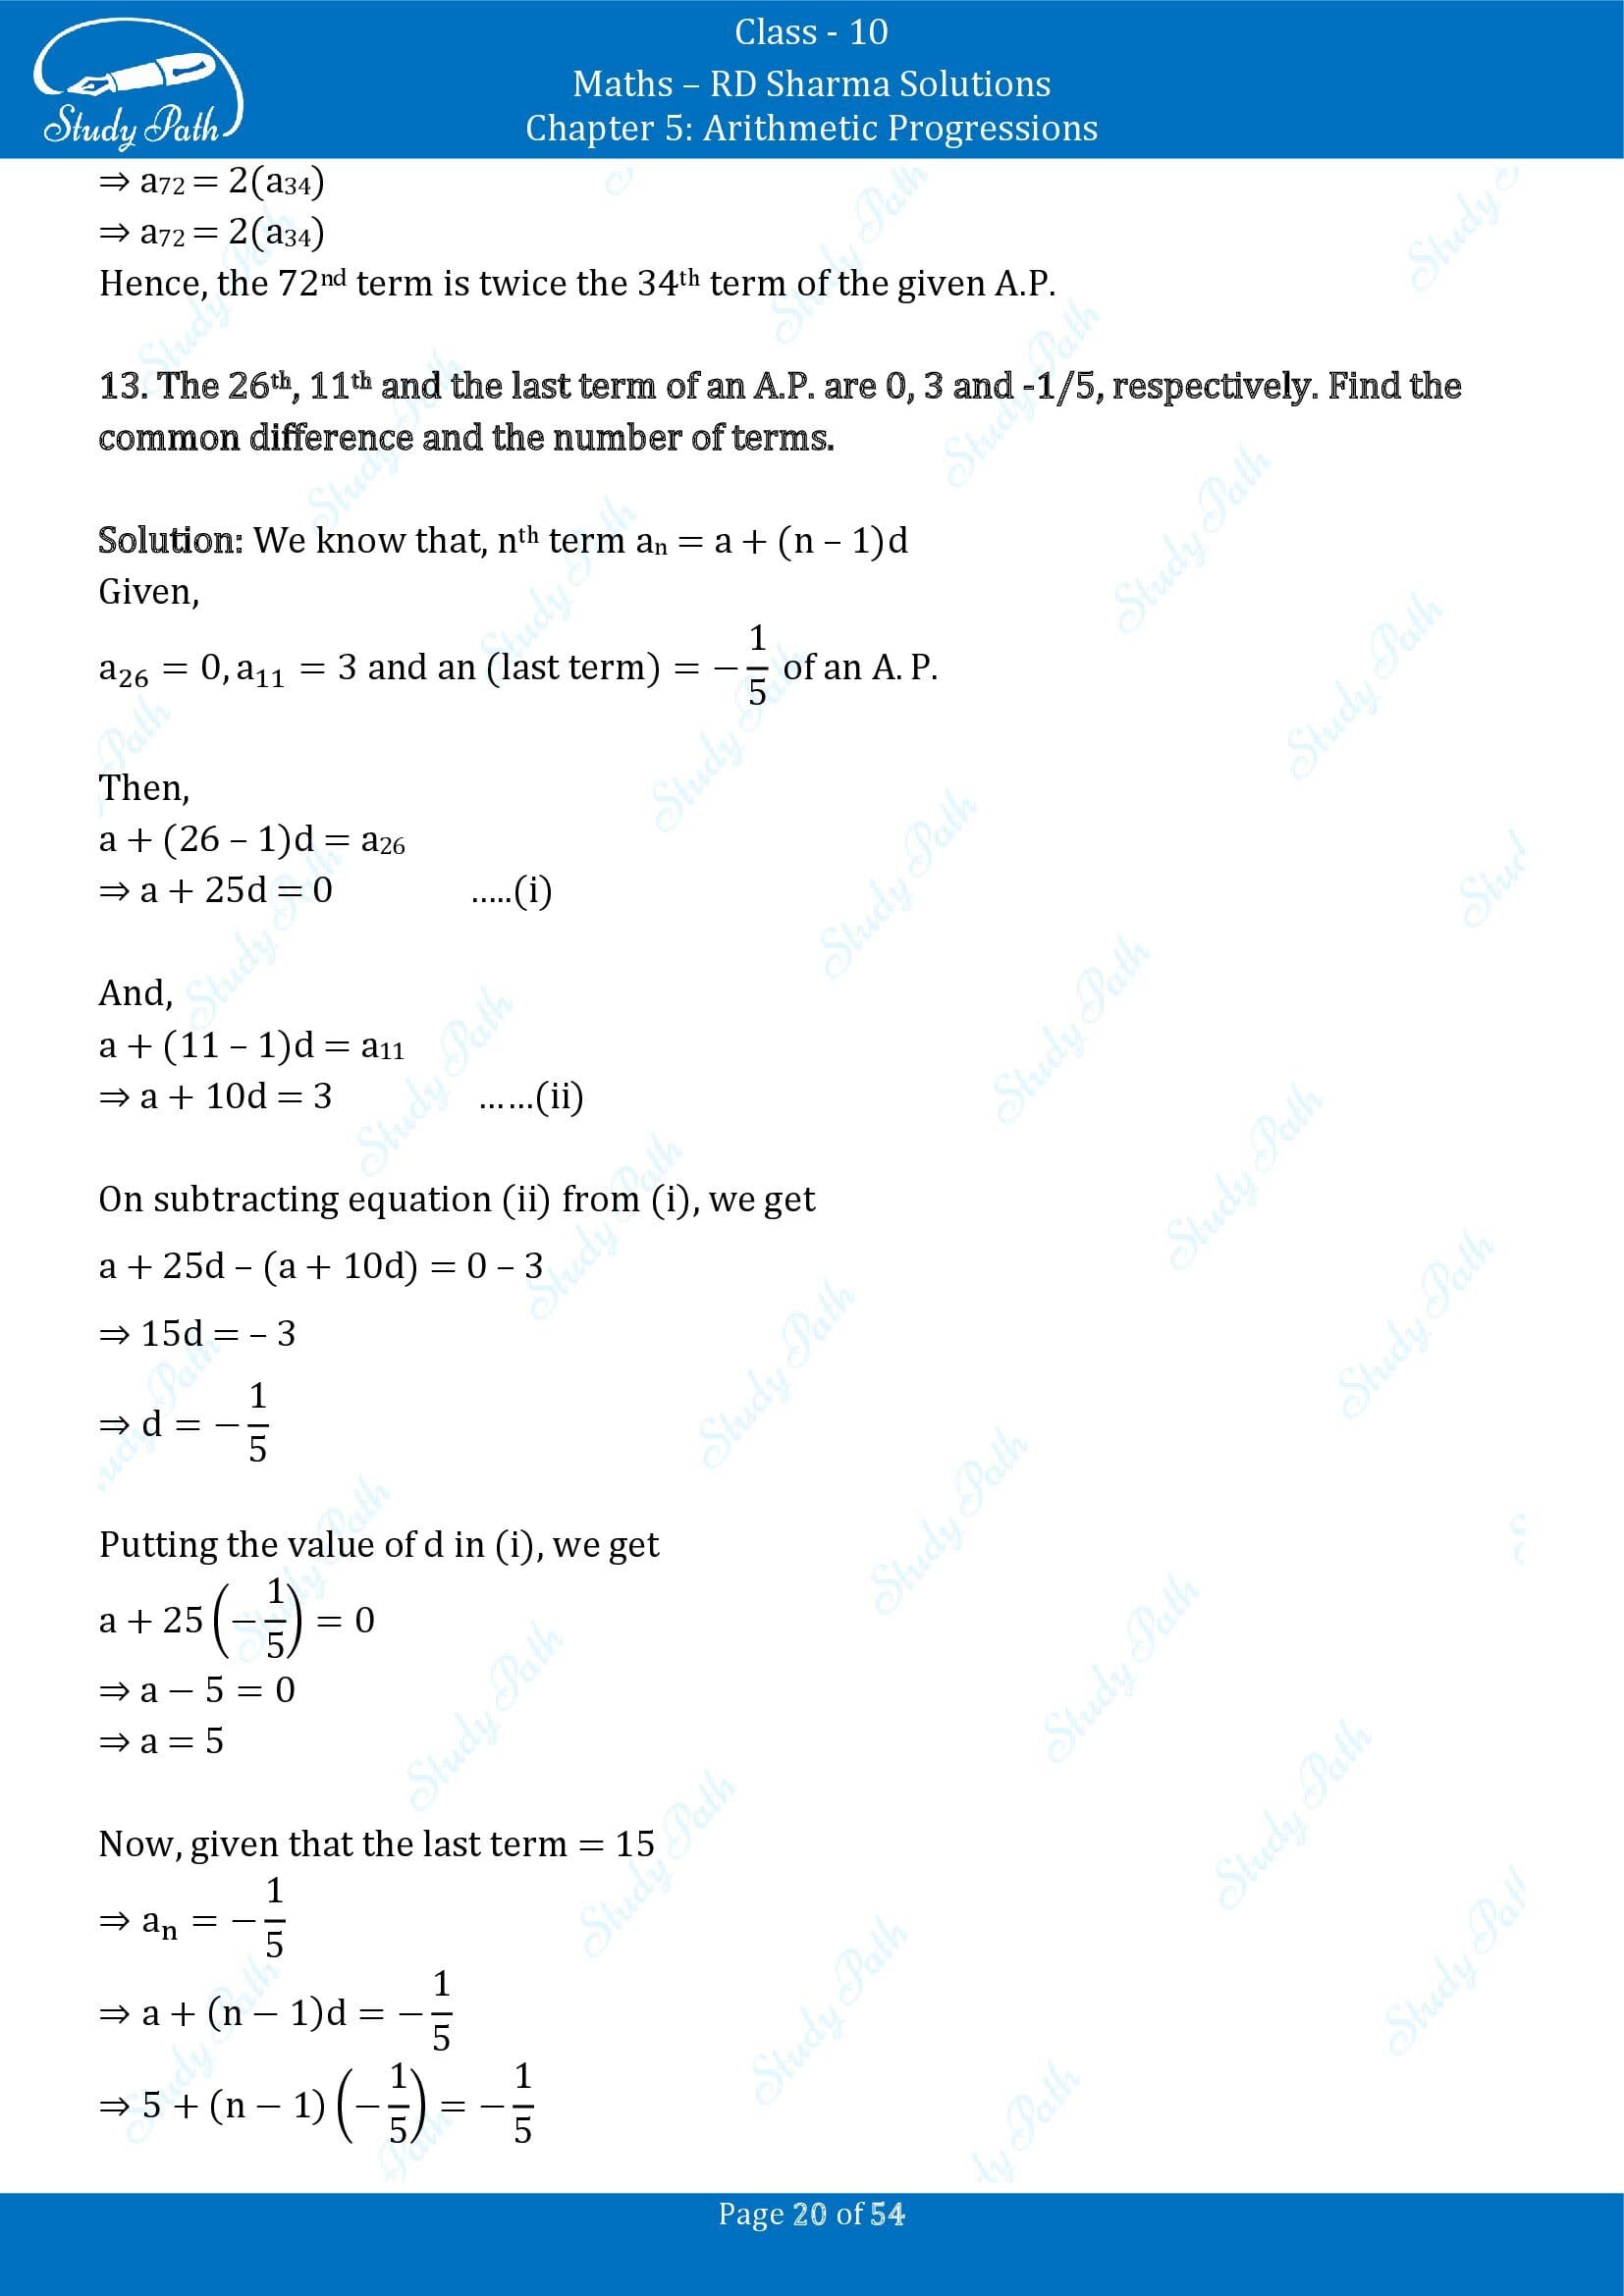 RD Sharma Solutions Class 10 Chapter 5 Arithmetic Progressions Exercise 5.4 00020